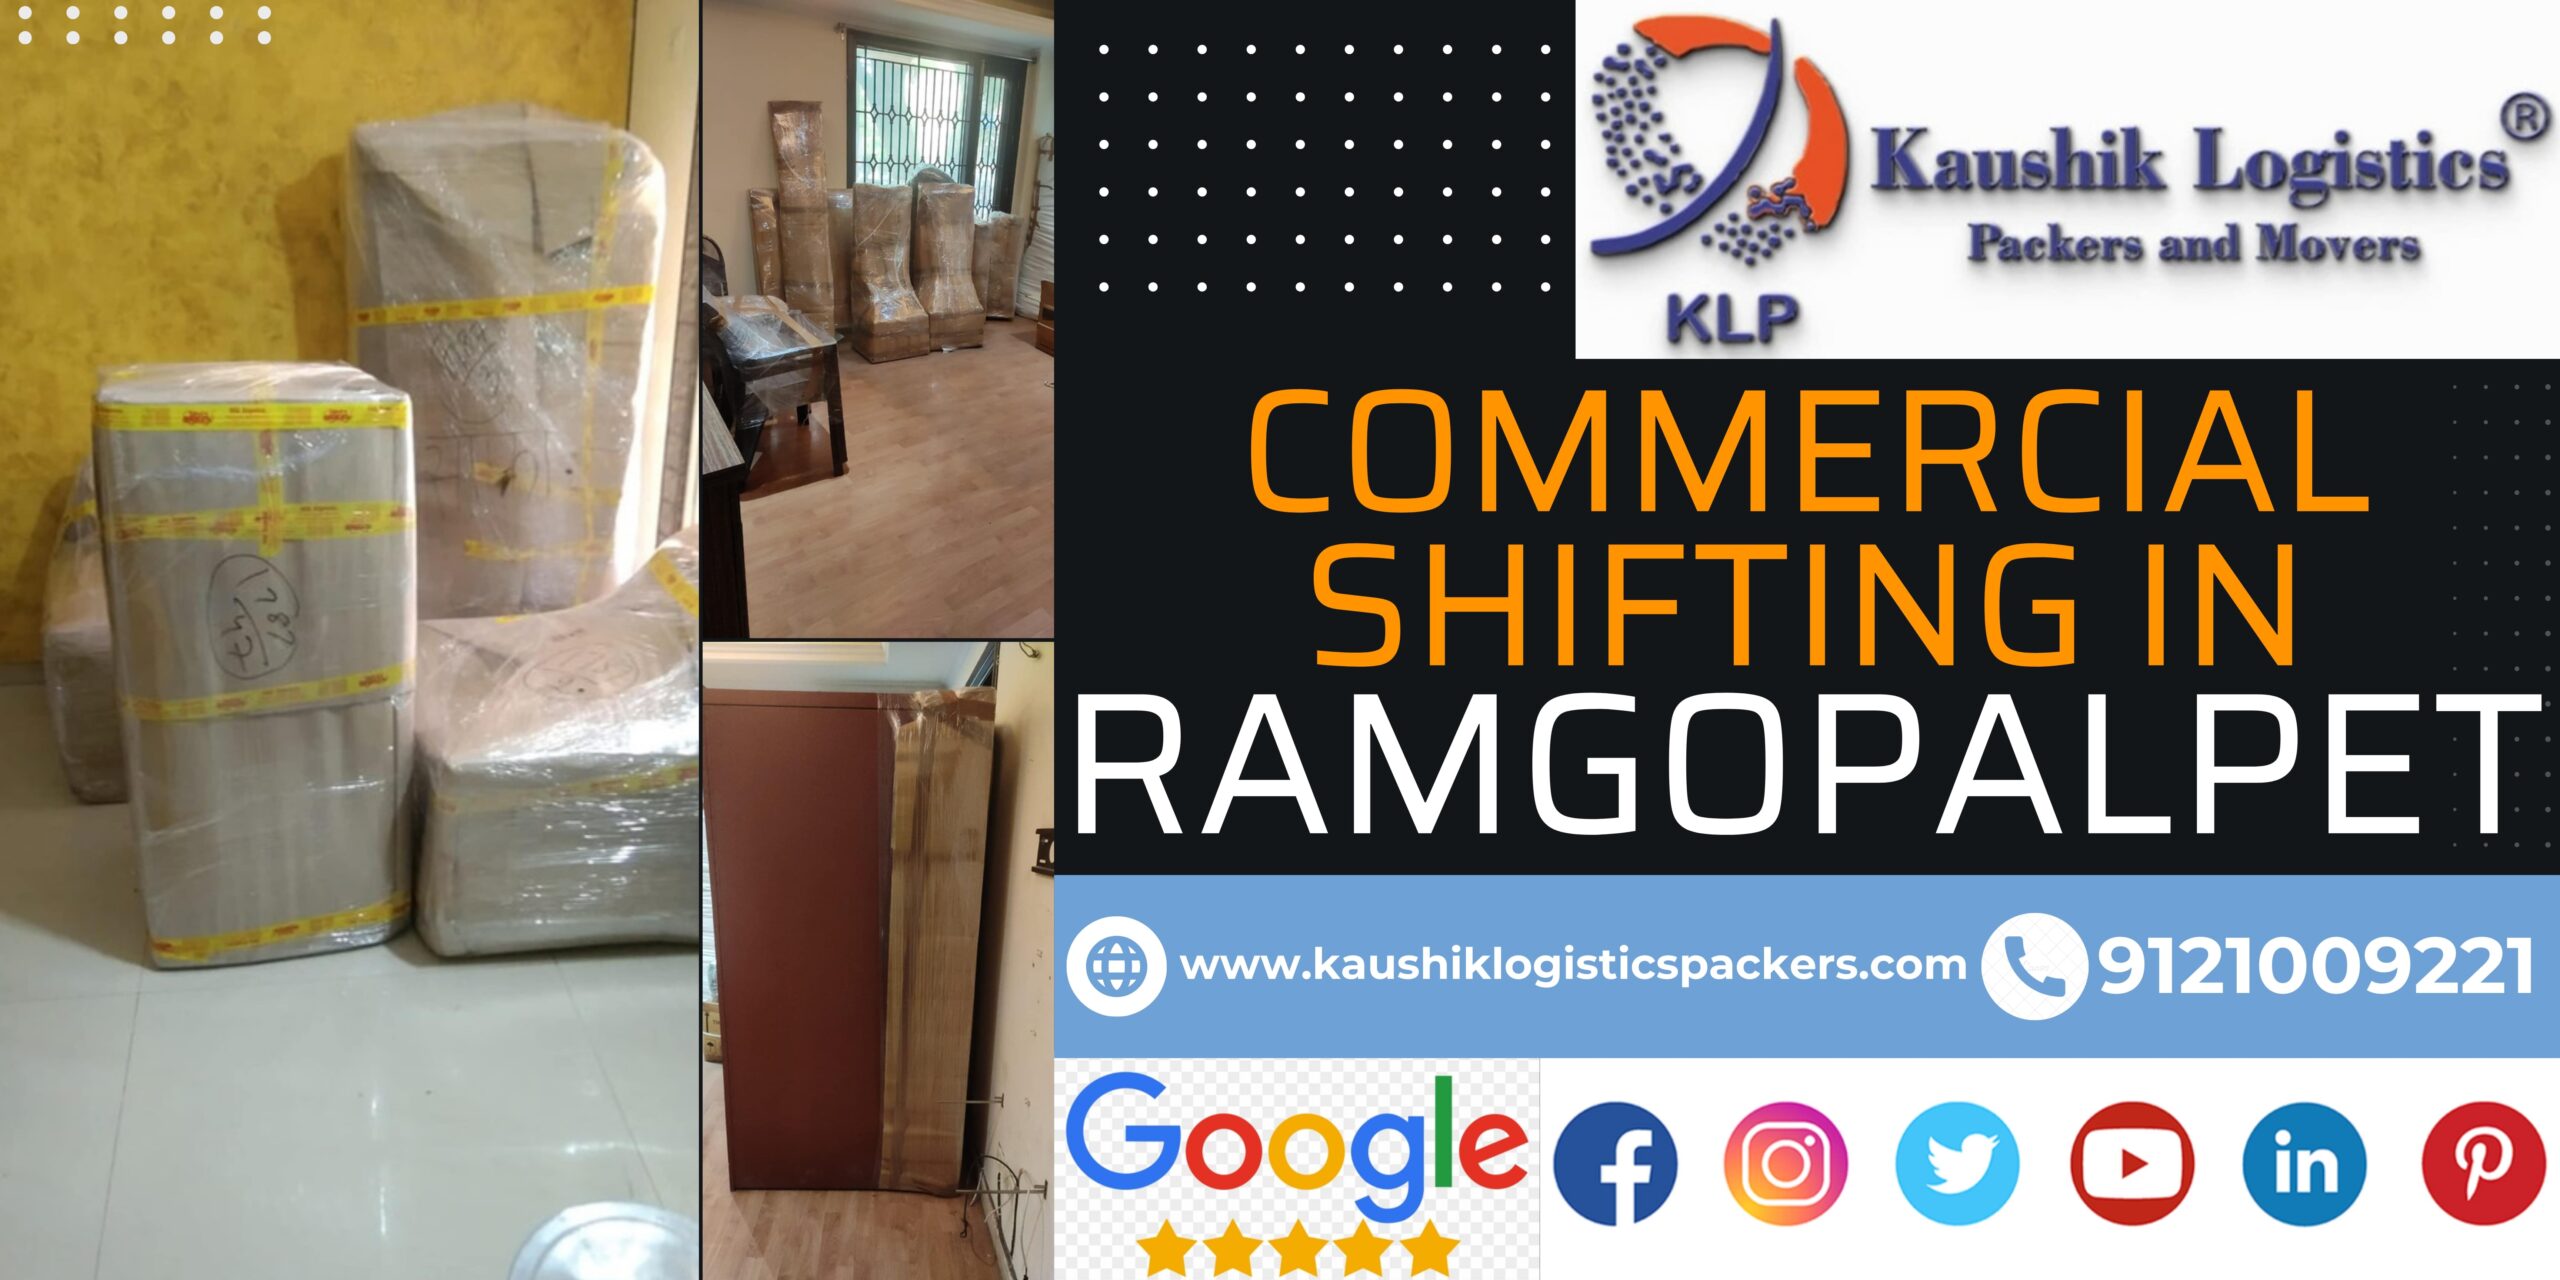 Packers and Movers In Ramgopalpet